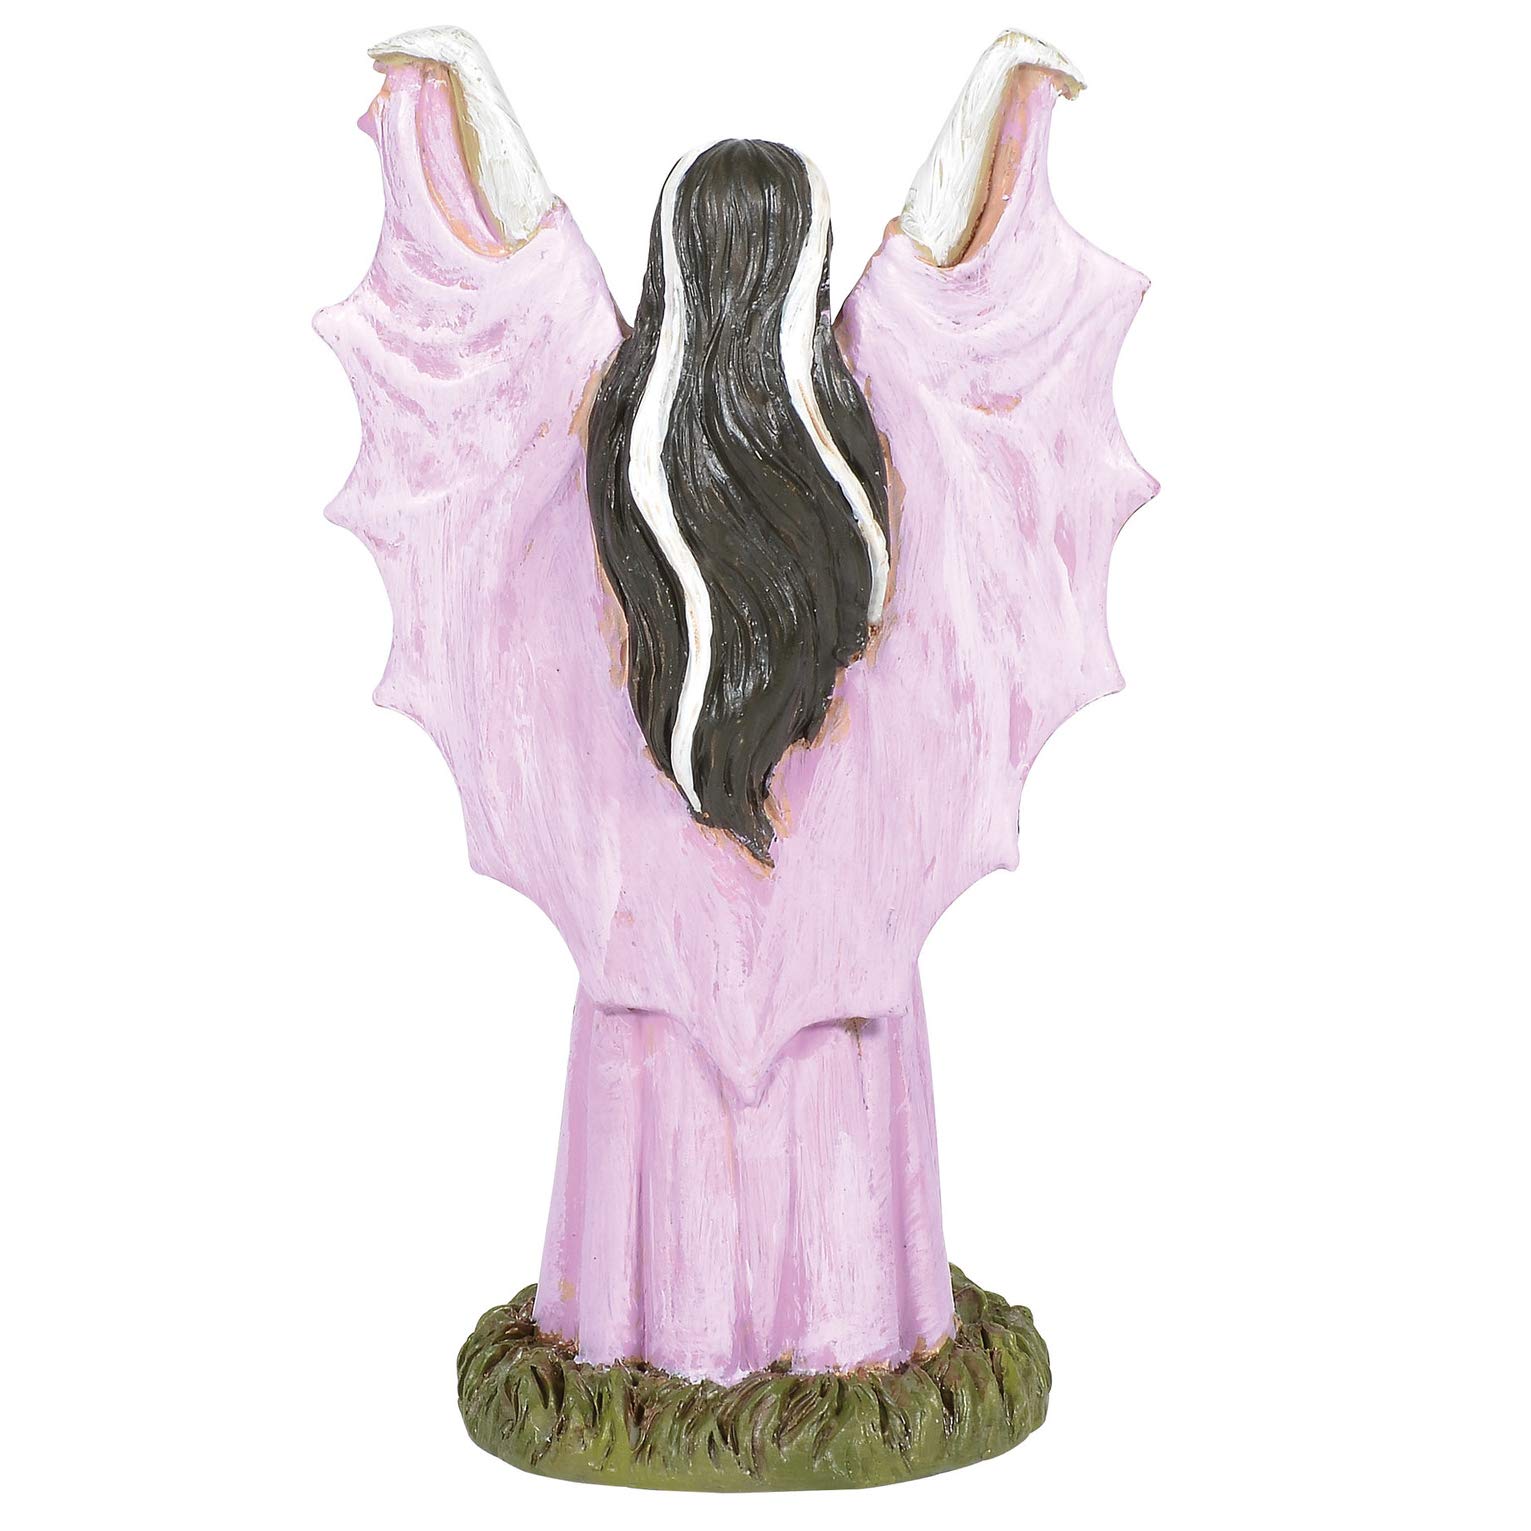 Department 56 Village Lily Munster Figurine, 3 Inch, Multicolor,6005636